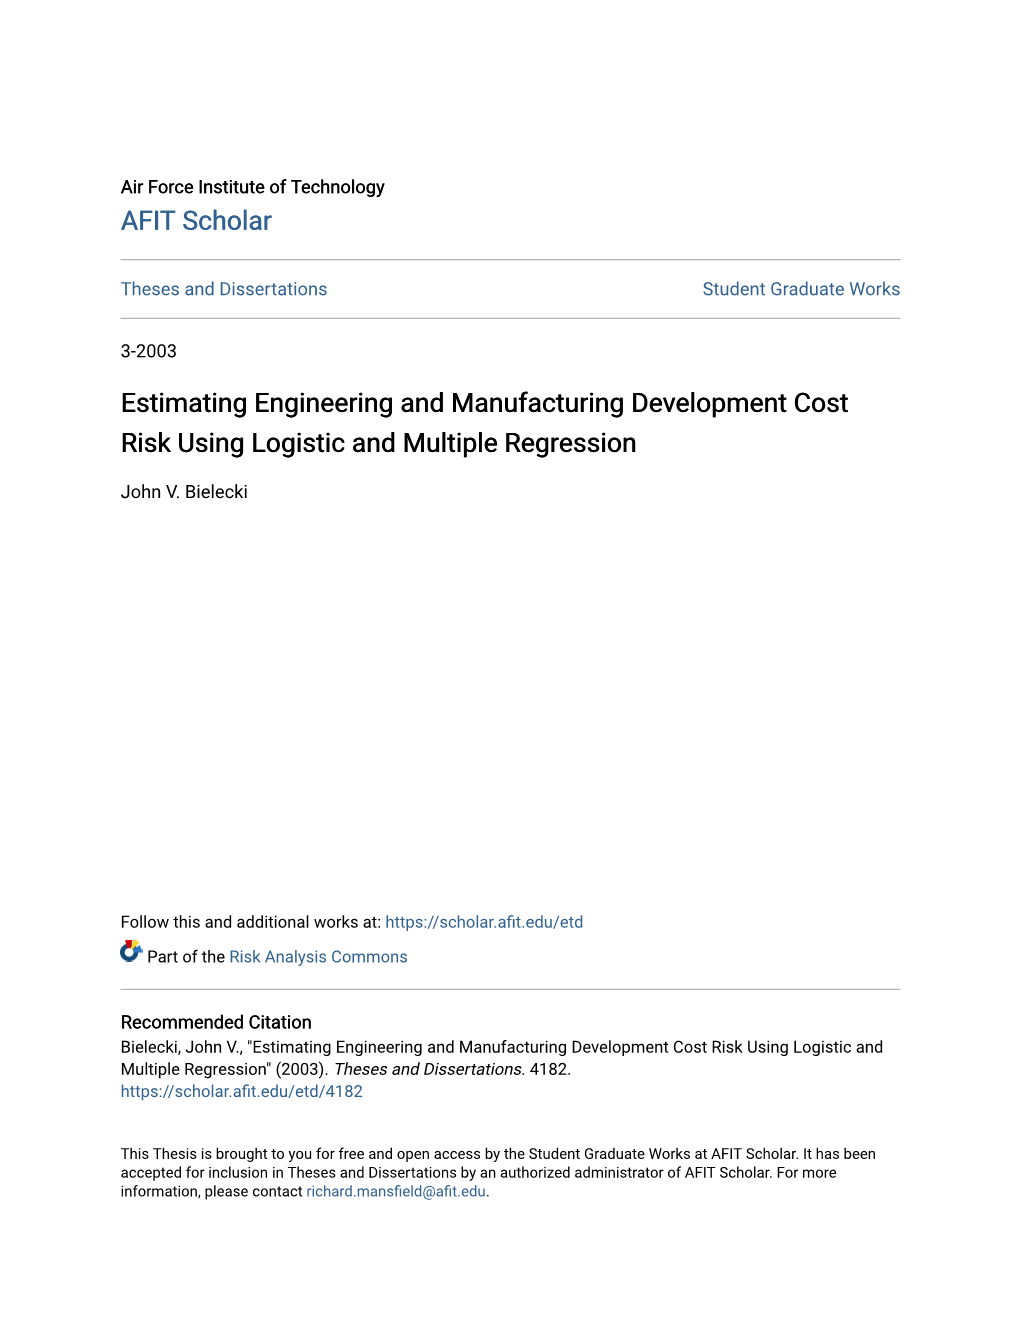 Estimating Engineering and Manufacturing Development Cost Risk Using Logistic and Multiple Regression